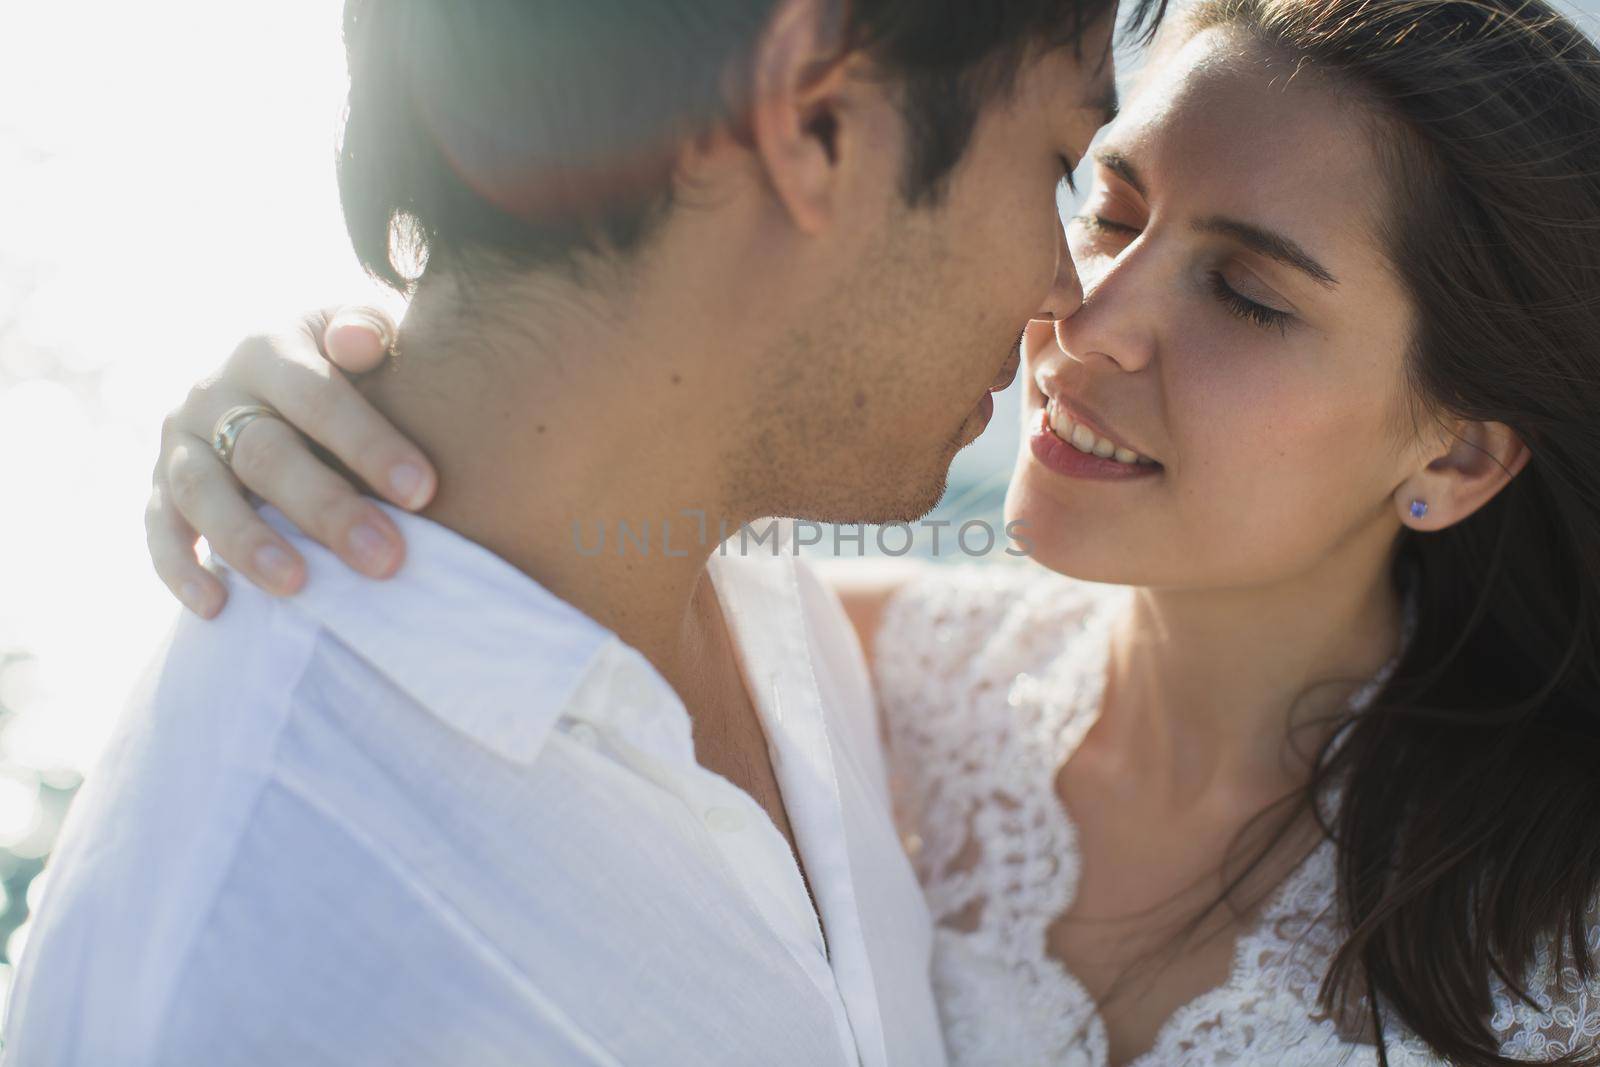 Beautiful wedding couple bride and groom on yacht at wedding day outdoors in the sea. Happy marriage couple kissing on boat in ocean. Stylish Marine wedding by StudioPeace